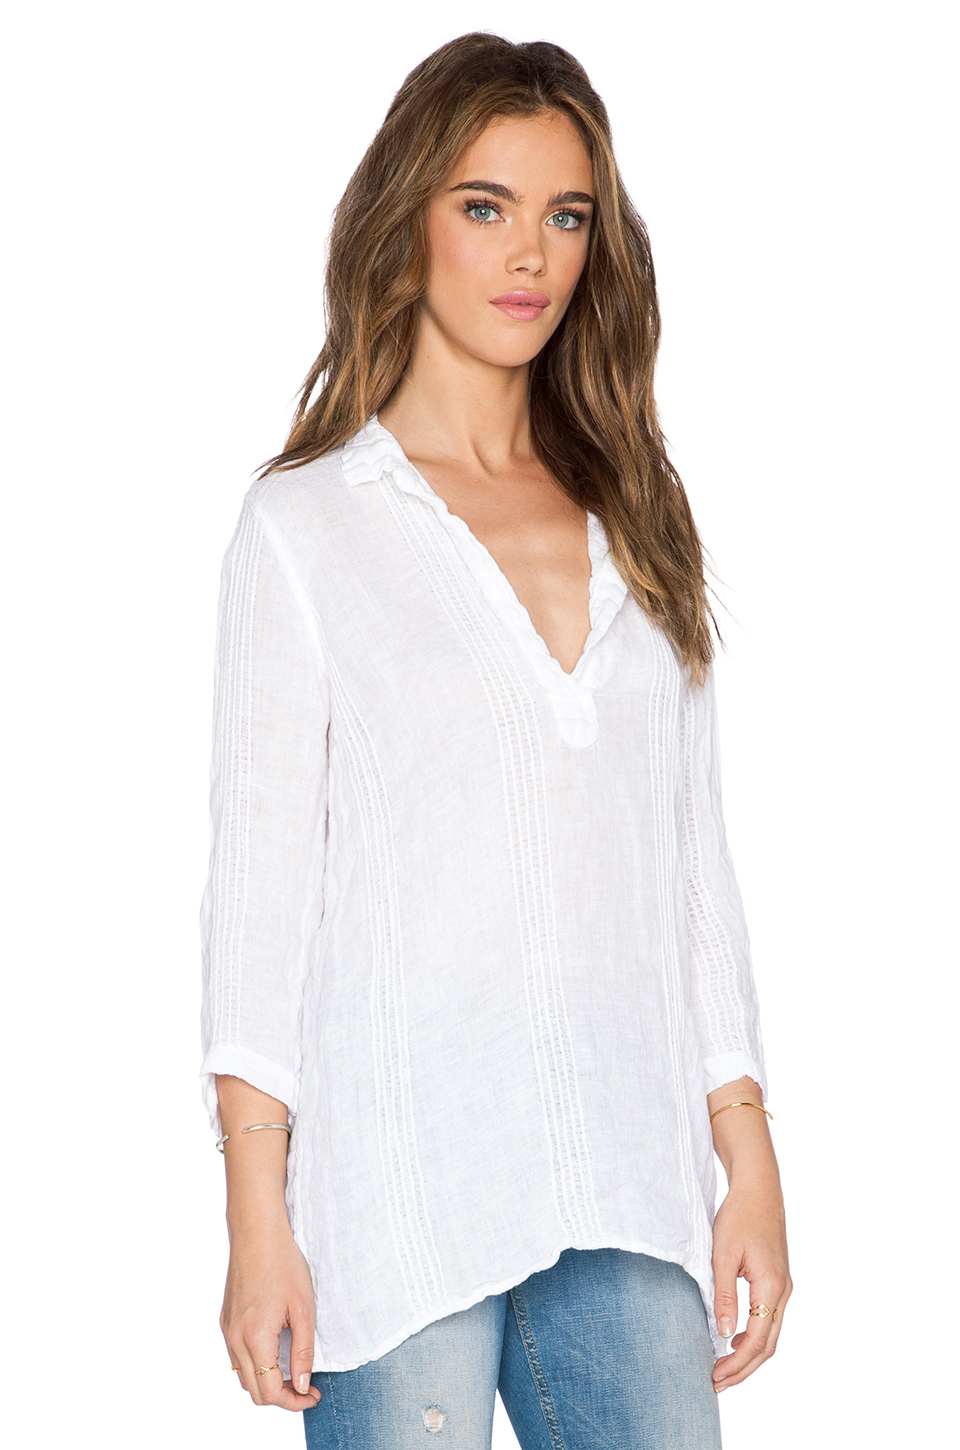 Lyst - Cp Shades Kendall Linen Dress in White